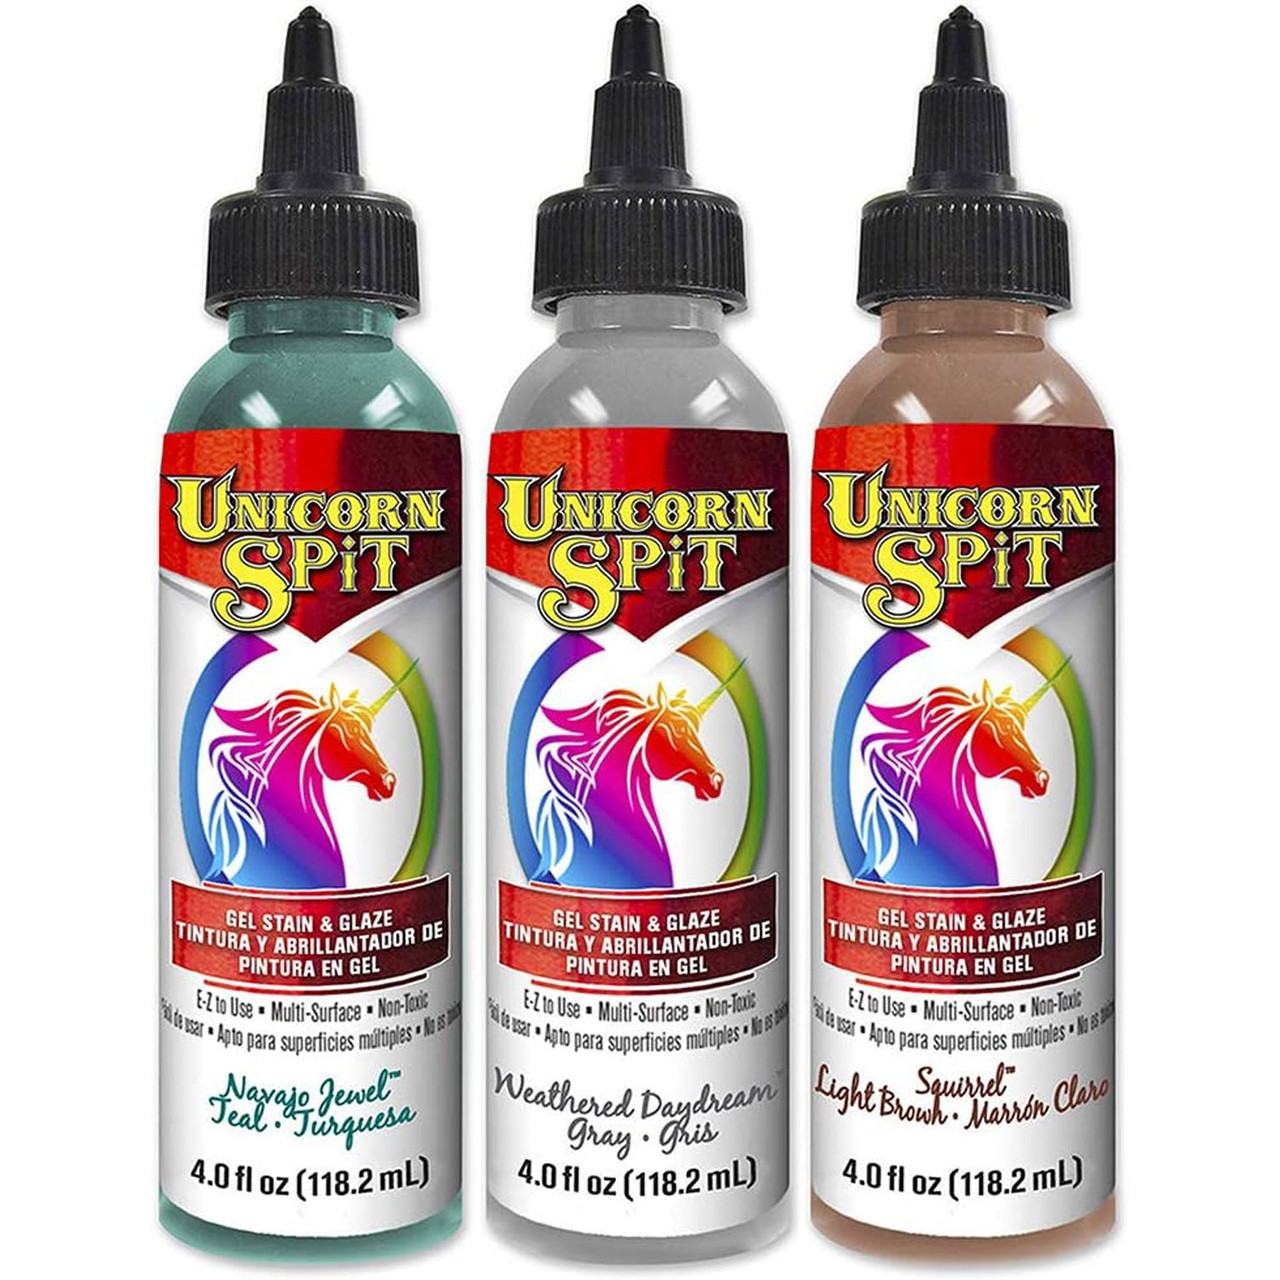 Unicorn Spit Gel Stain and Paint New Color Fall 2017 Collection - Squirrel, Navajo Jewel, Weathered Daydream